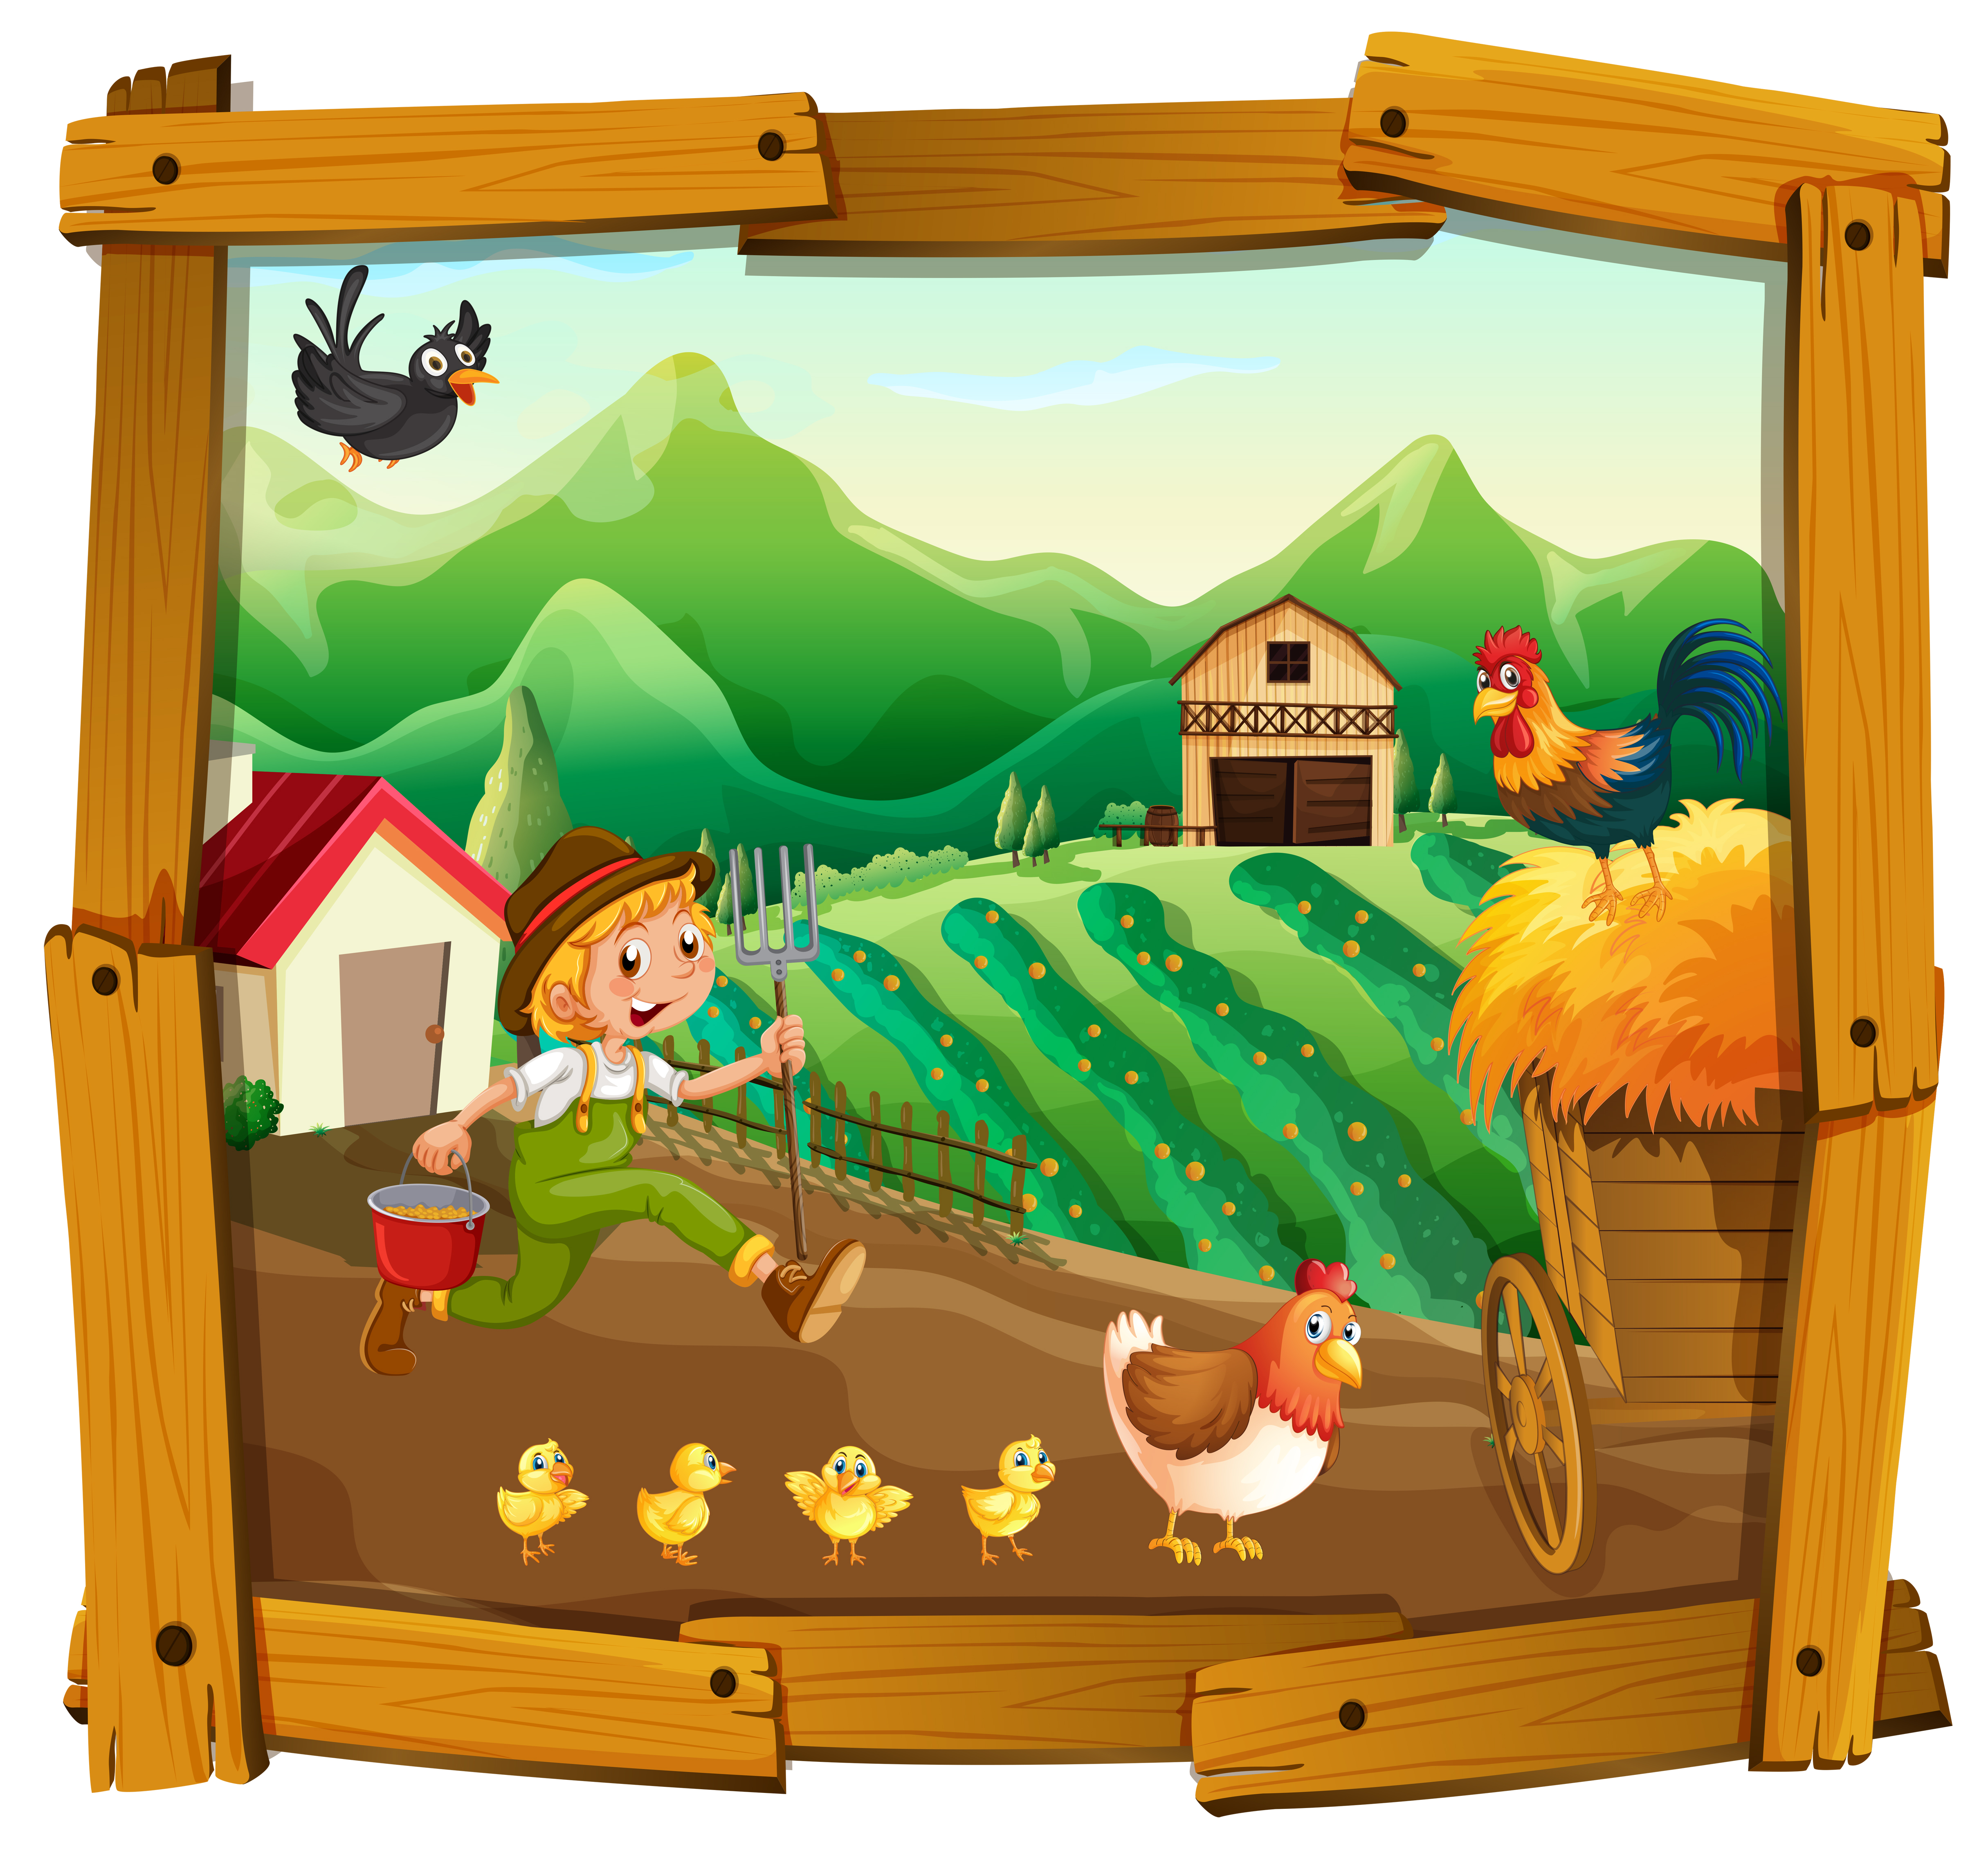 Farmer and chickens in the farm 520931 - Download Free Vectors, Clipart